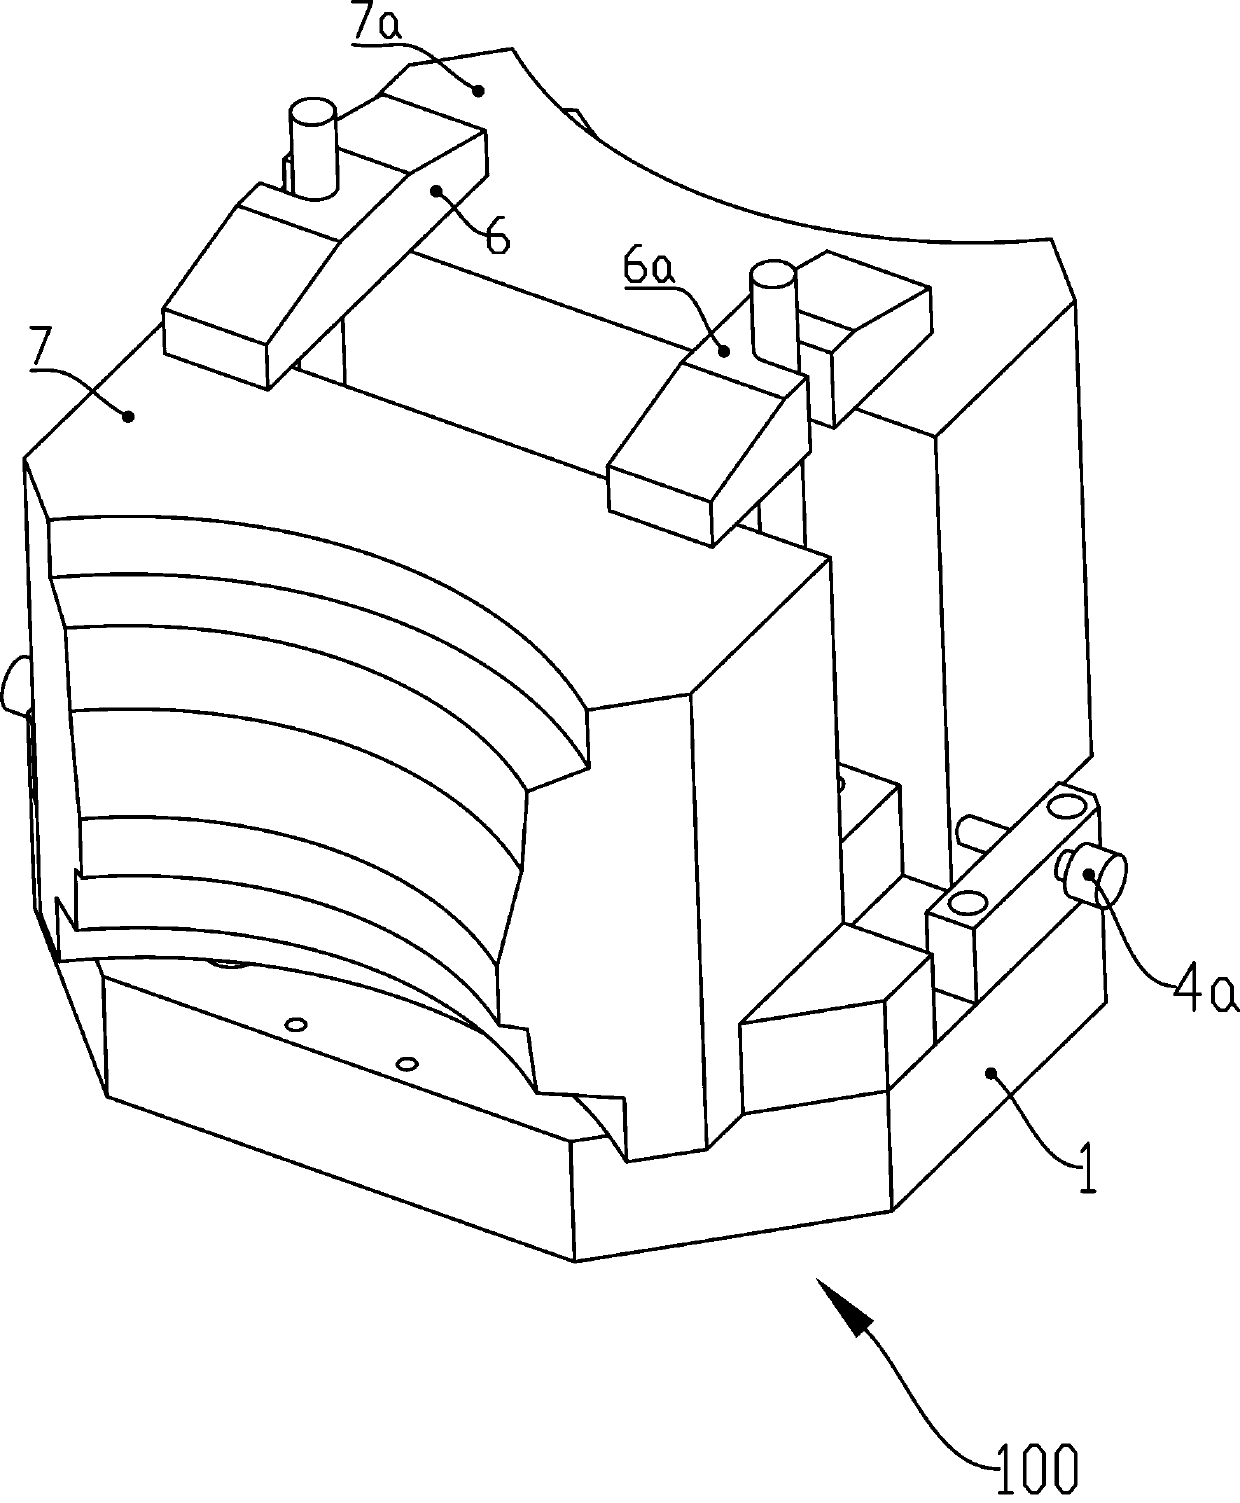 Positioning clamp for clamping hub side modules